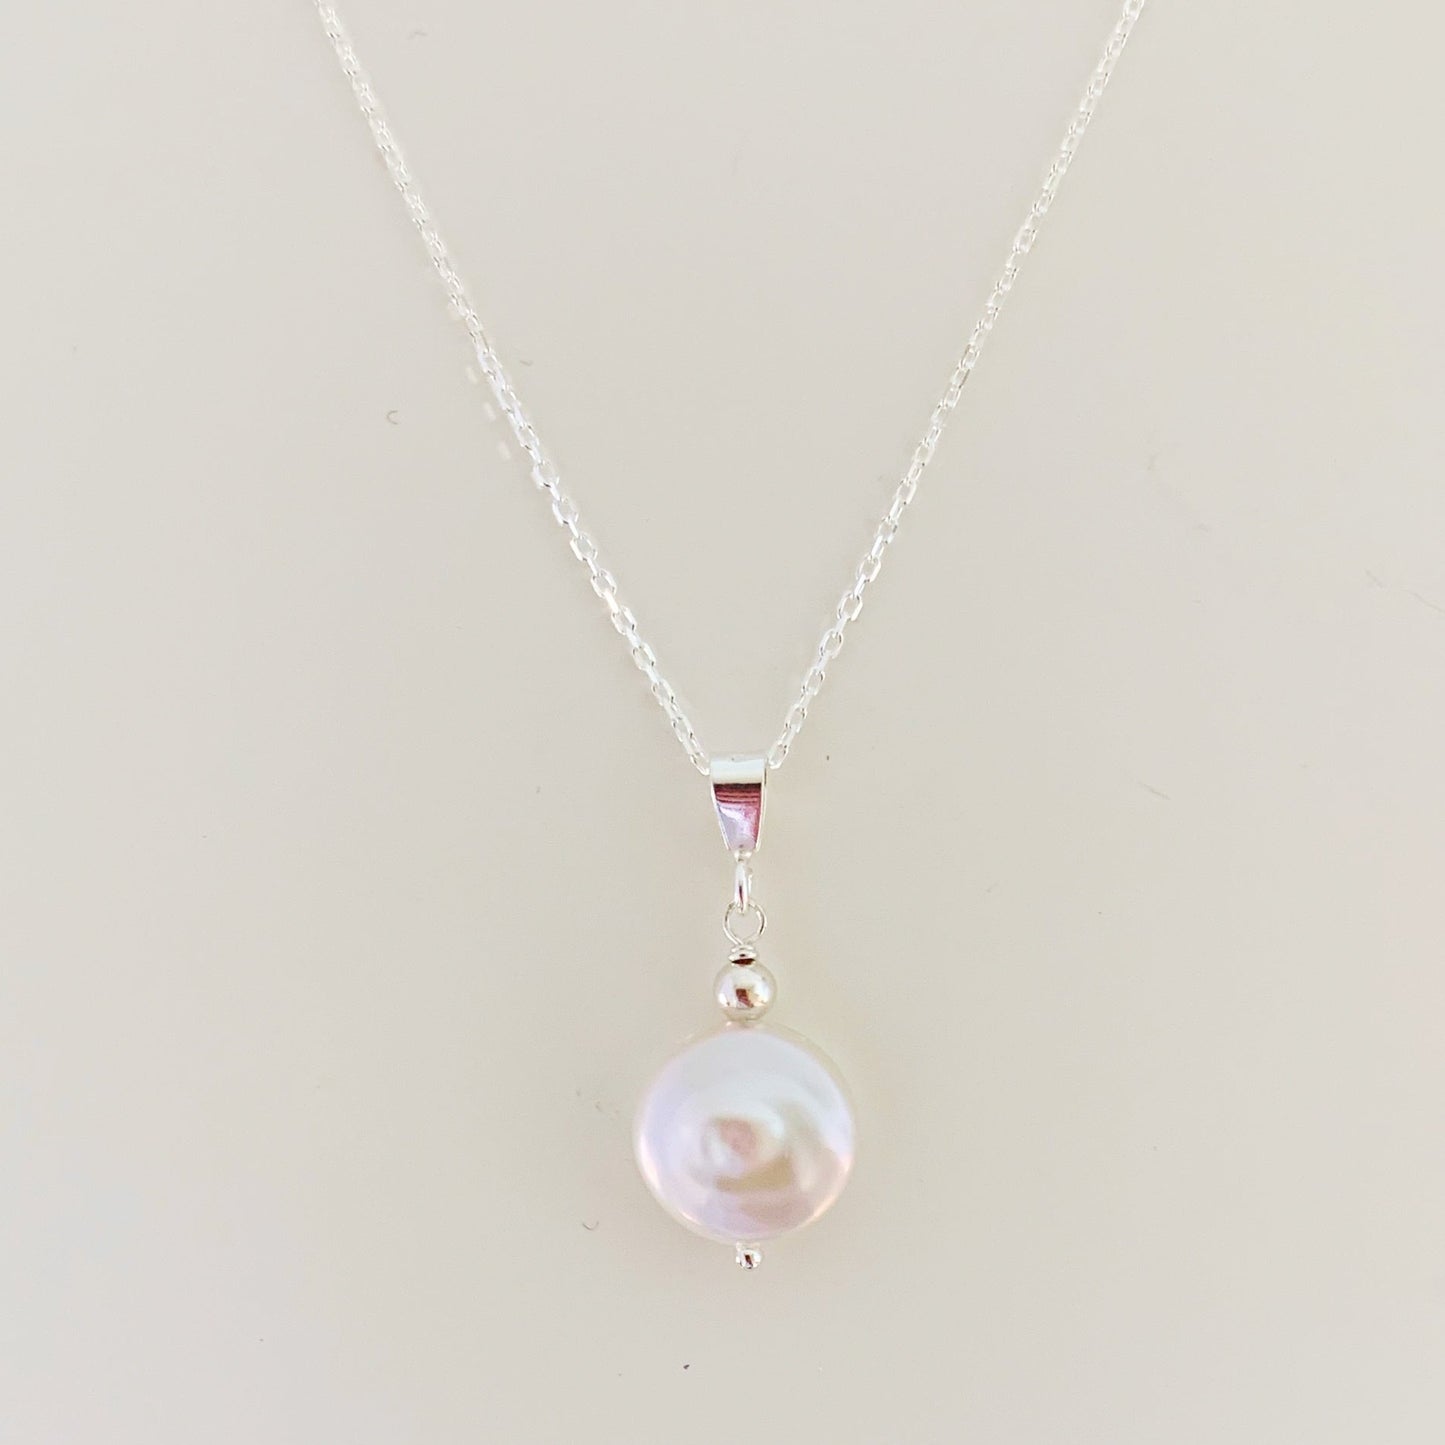 the newport necklace by mermaids and madeleines is a simple style pendant designed with a white freshwater coin pearl and sterling silver chain and findings